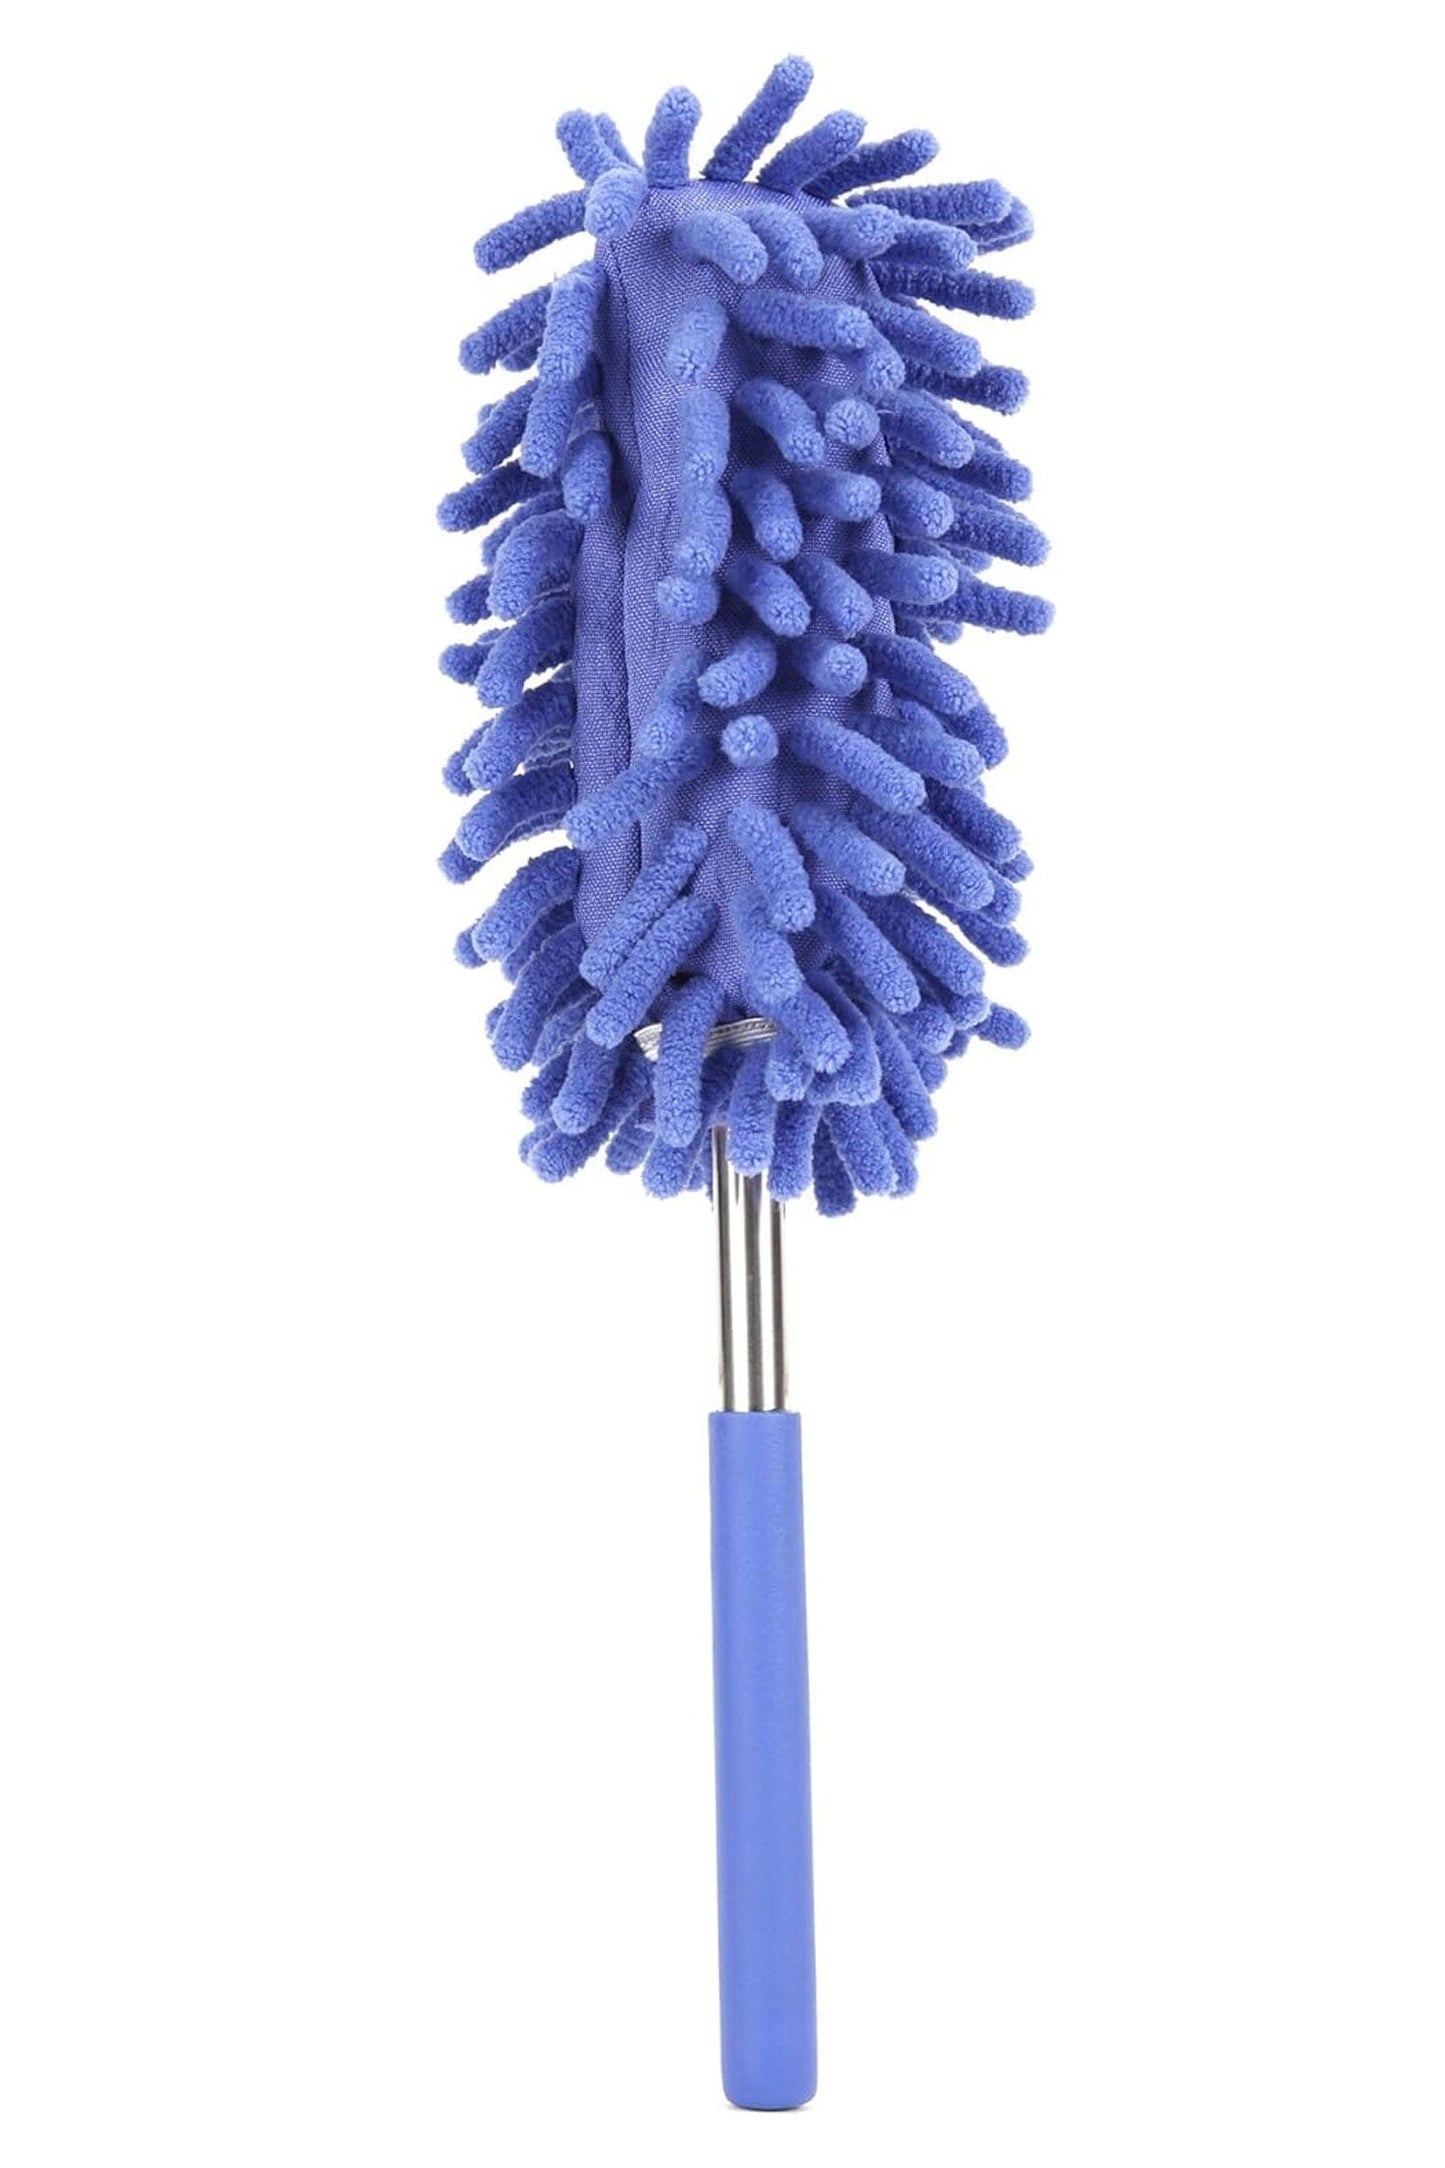 Sheffield Super Absorbent Microfiber Duster With Extendable Stick